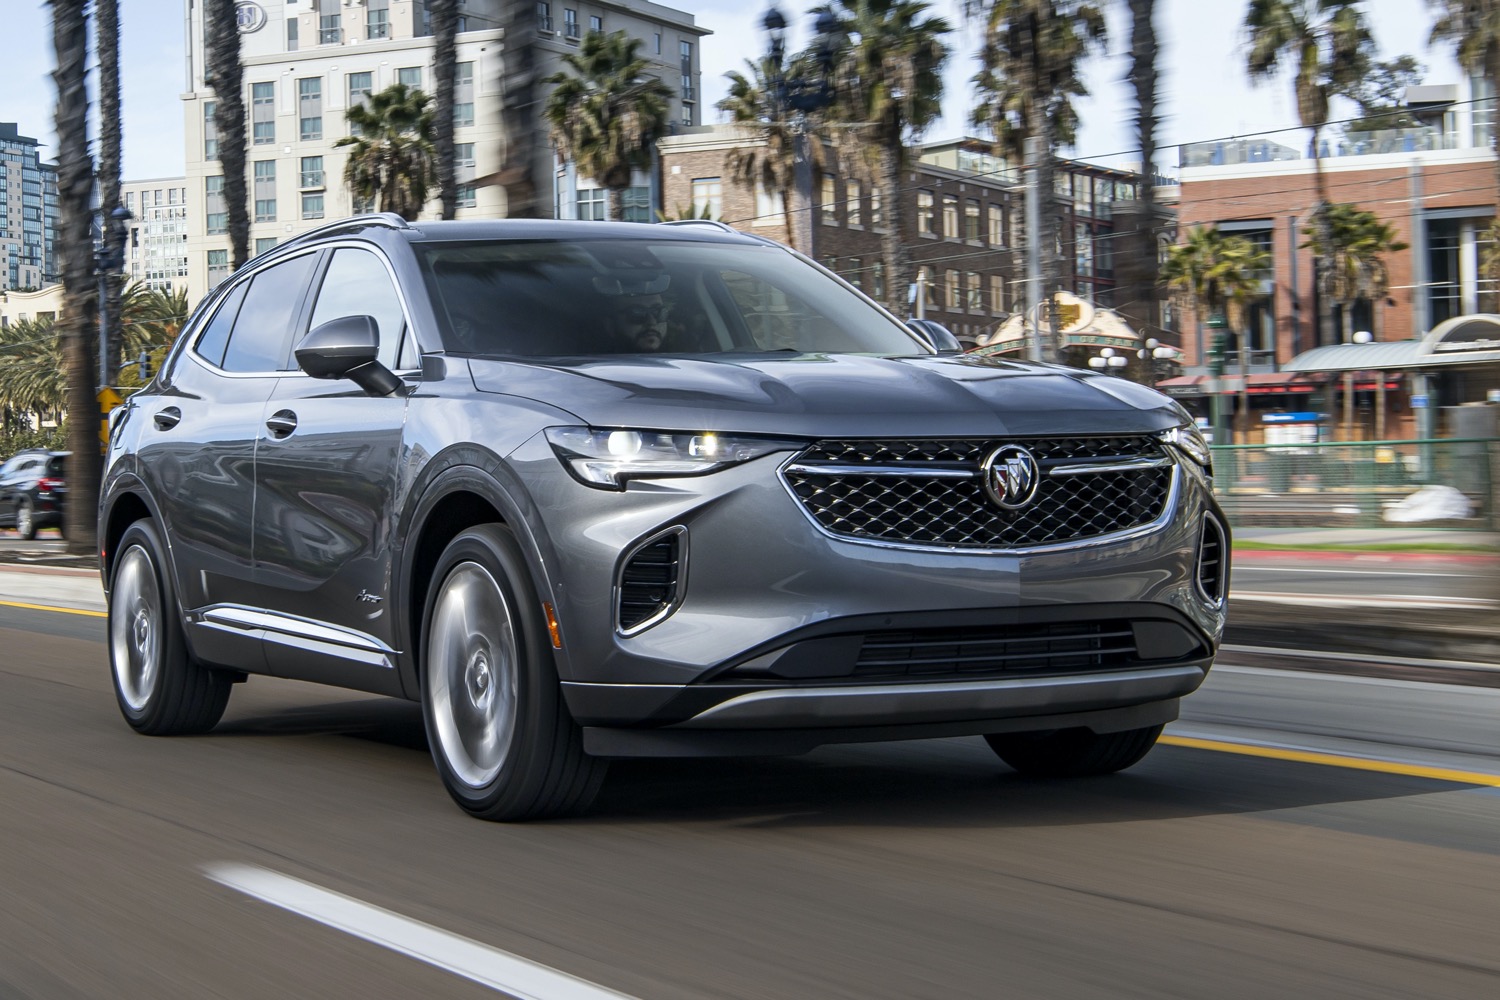 2023 Buick Envision Production Pushed Back To August